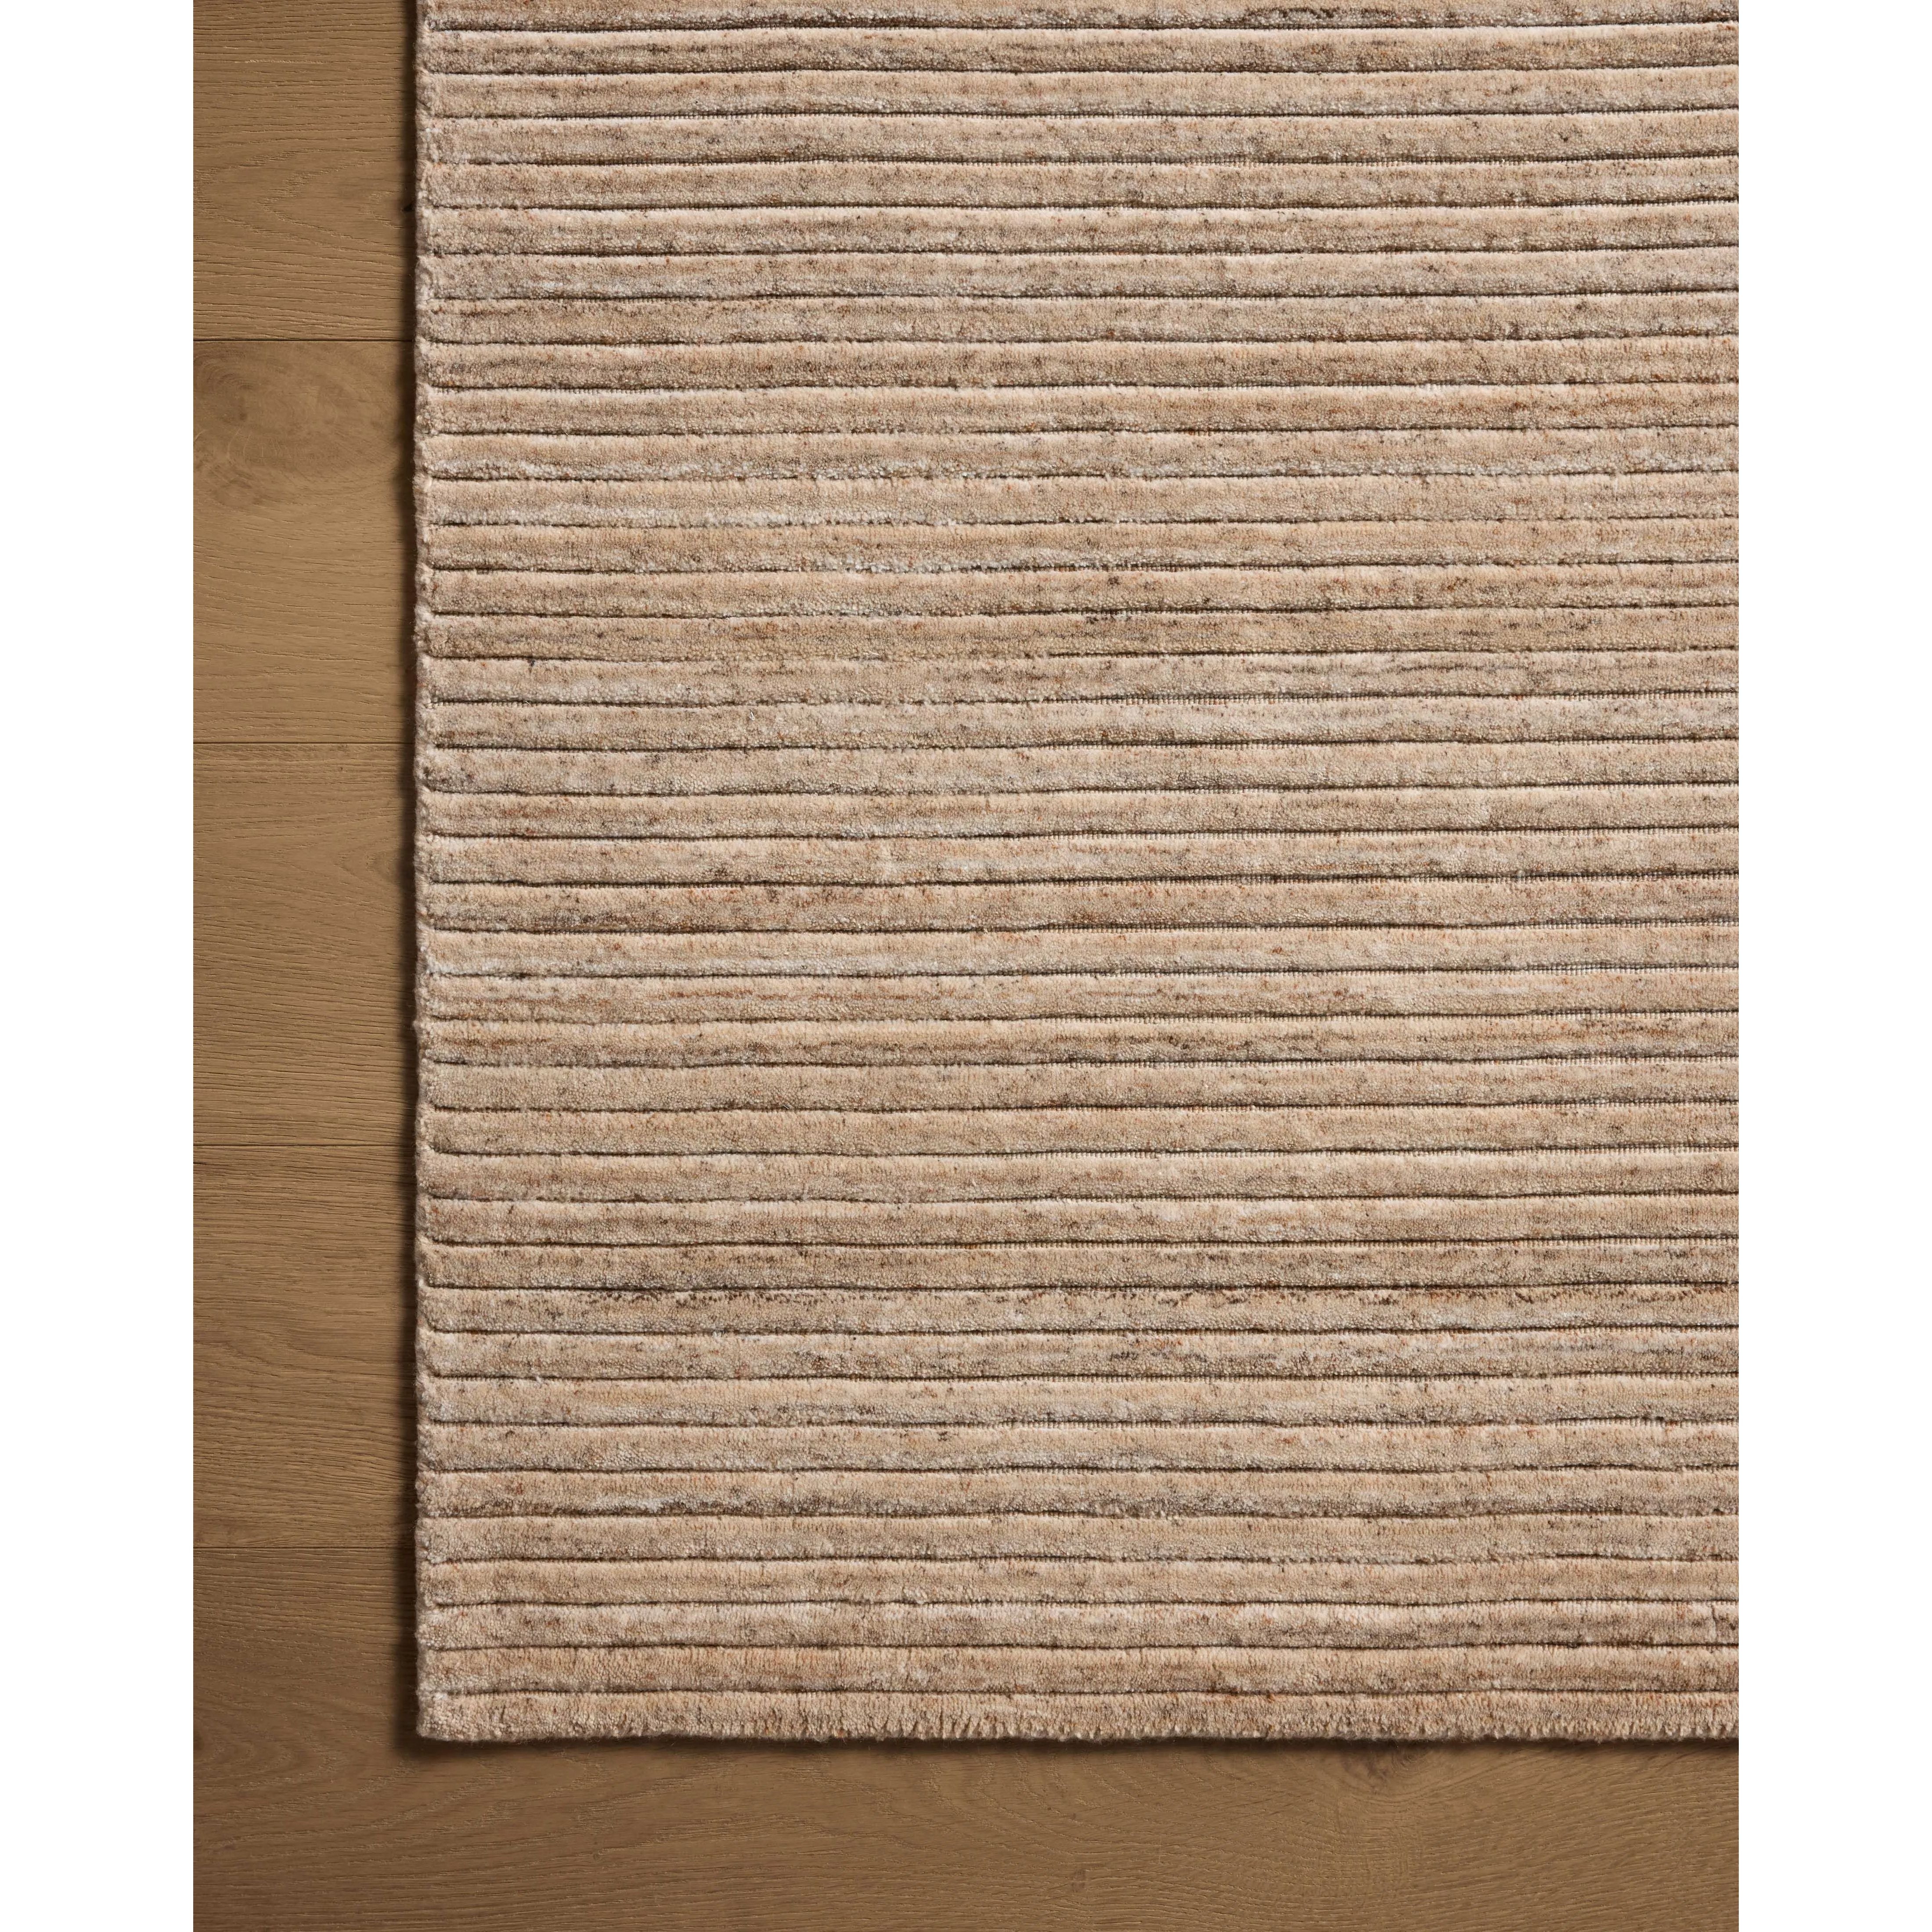 Sophisticated ribbing runs across the Sterling Collection, a nicely textured area rug with a natural color palette rich in tonality. Sterling is hand-loomed of polyester that's refreshingly easy to clean and withstands high-traffic in living rooms, dining rooms, or bedrooms. Amethyst Home provides interior design, new home construction design consulting, vintage area rugs, and lighting in the Newport Beach metro area.